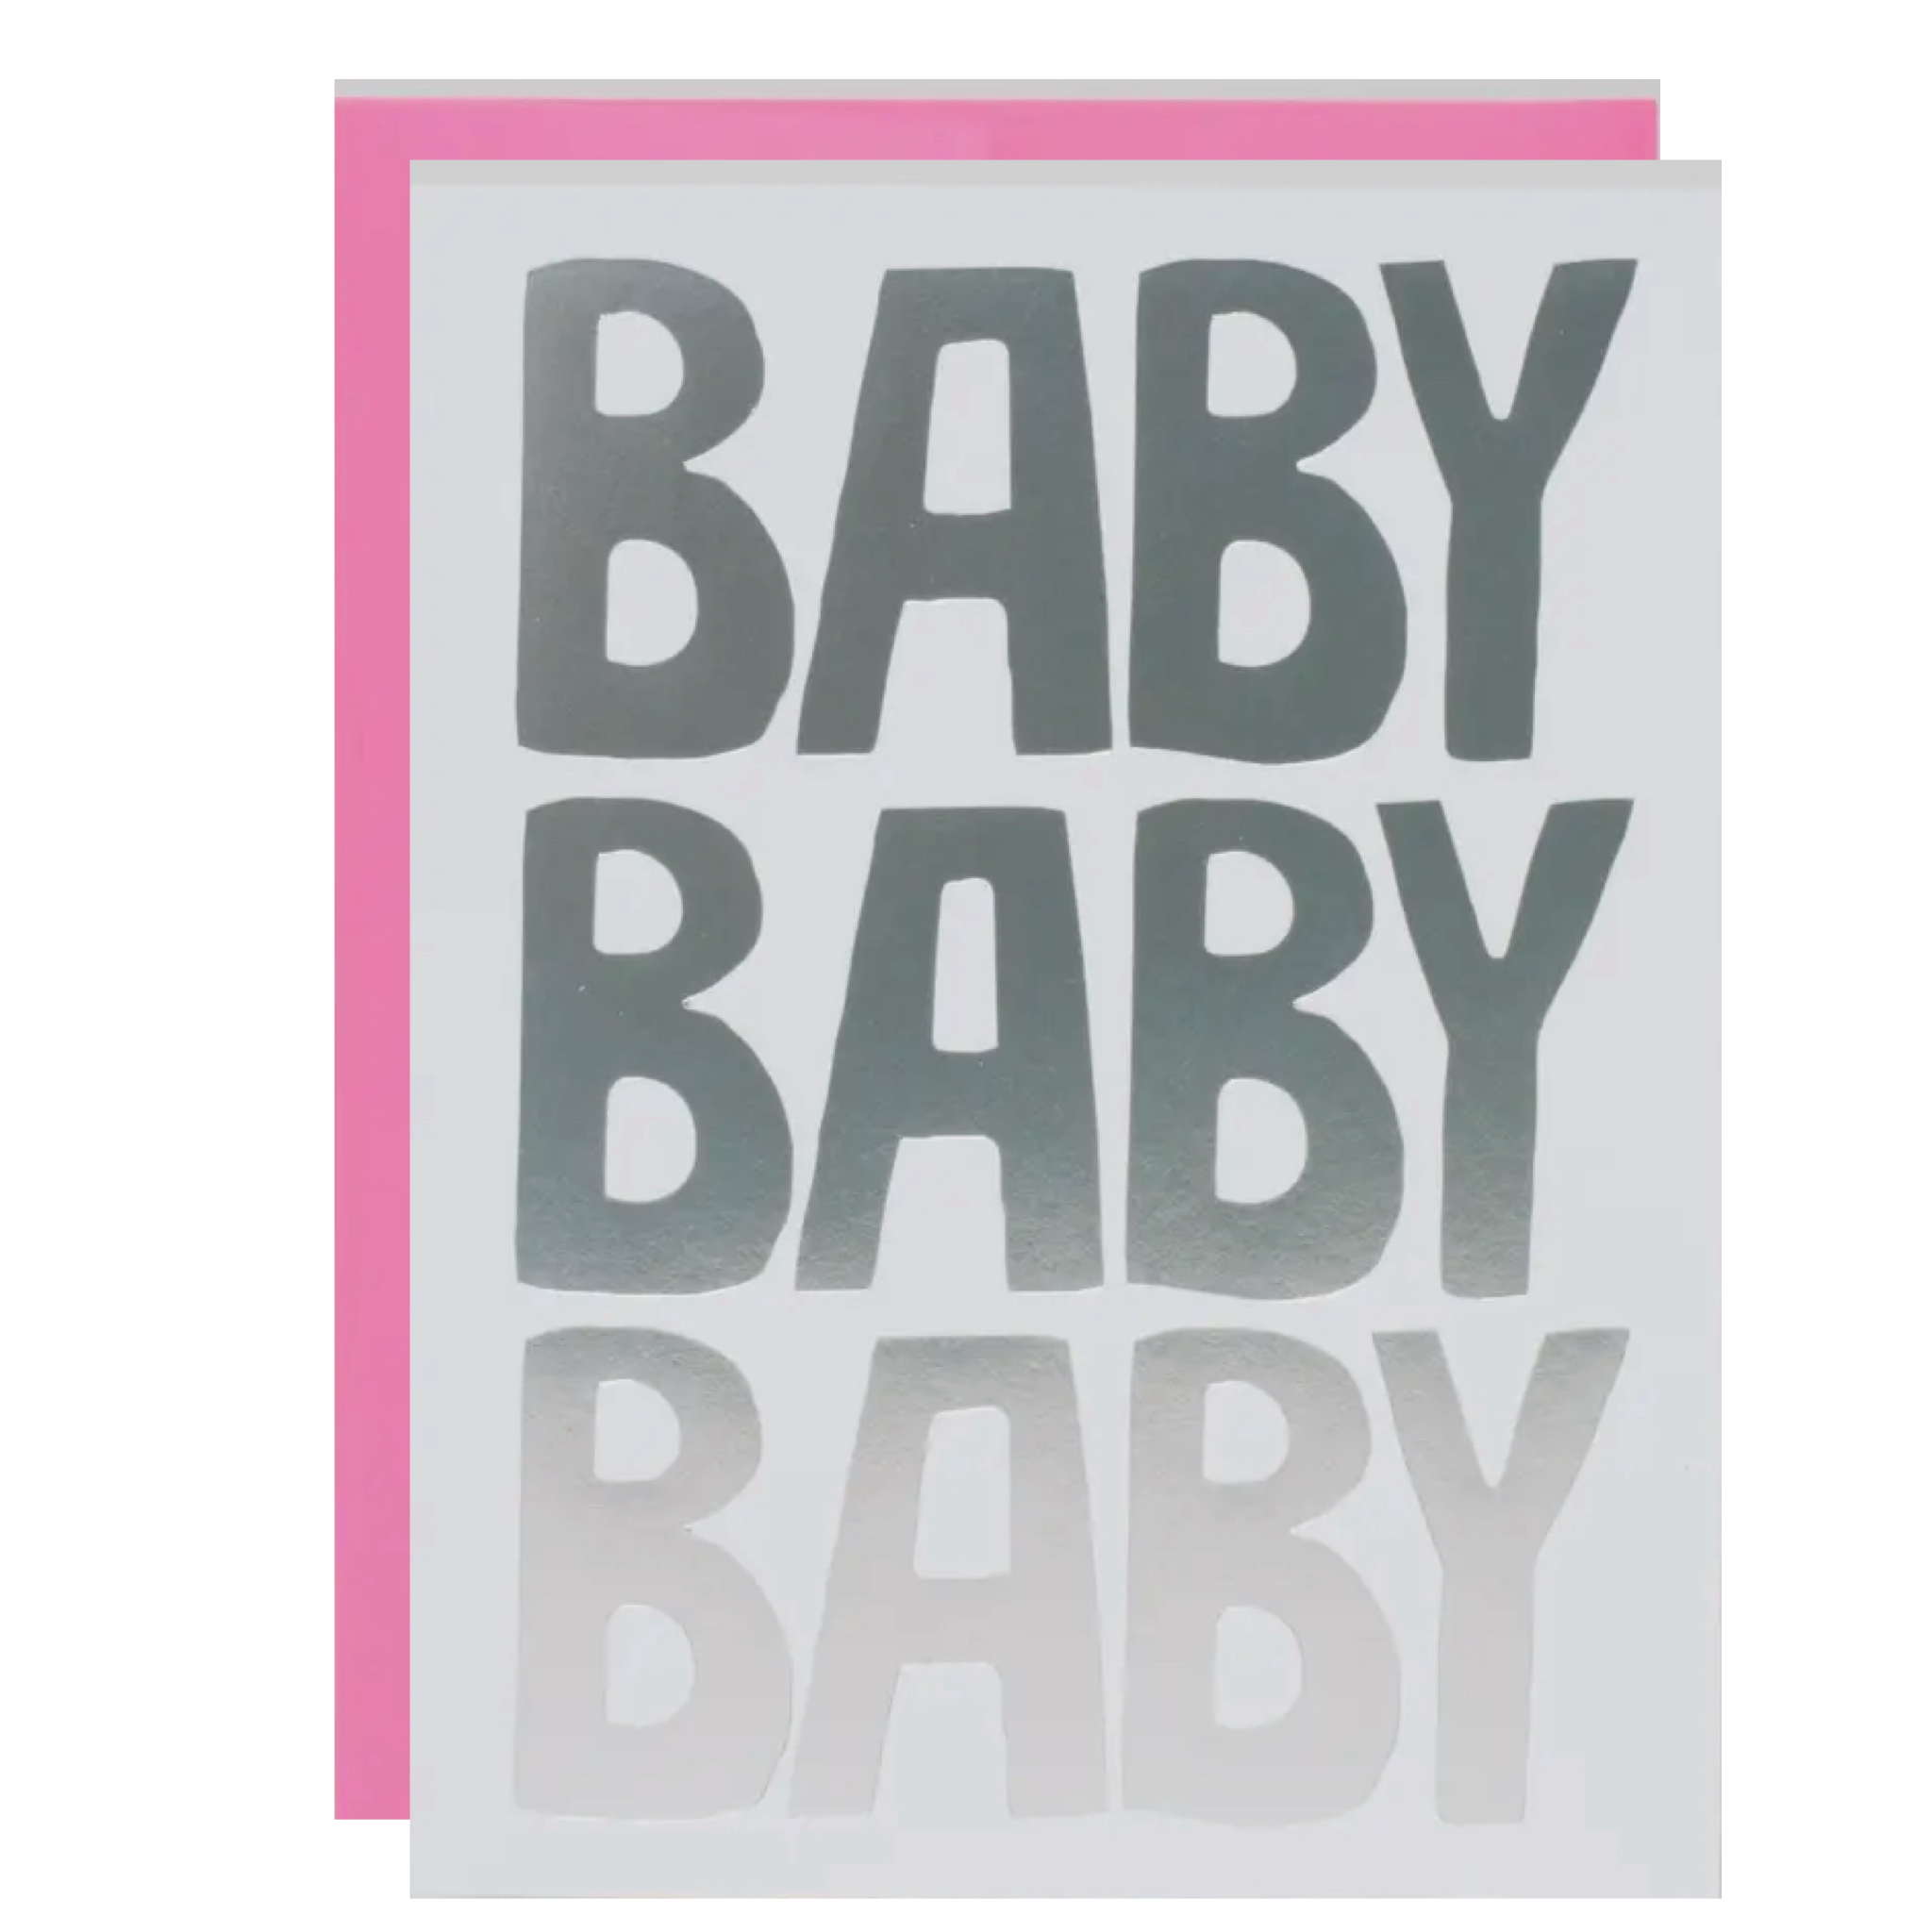 Baby baby baby greeting card